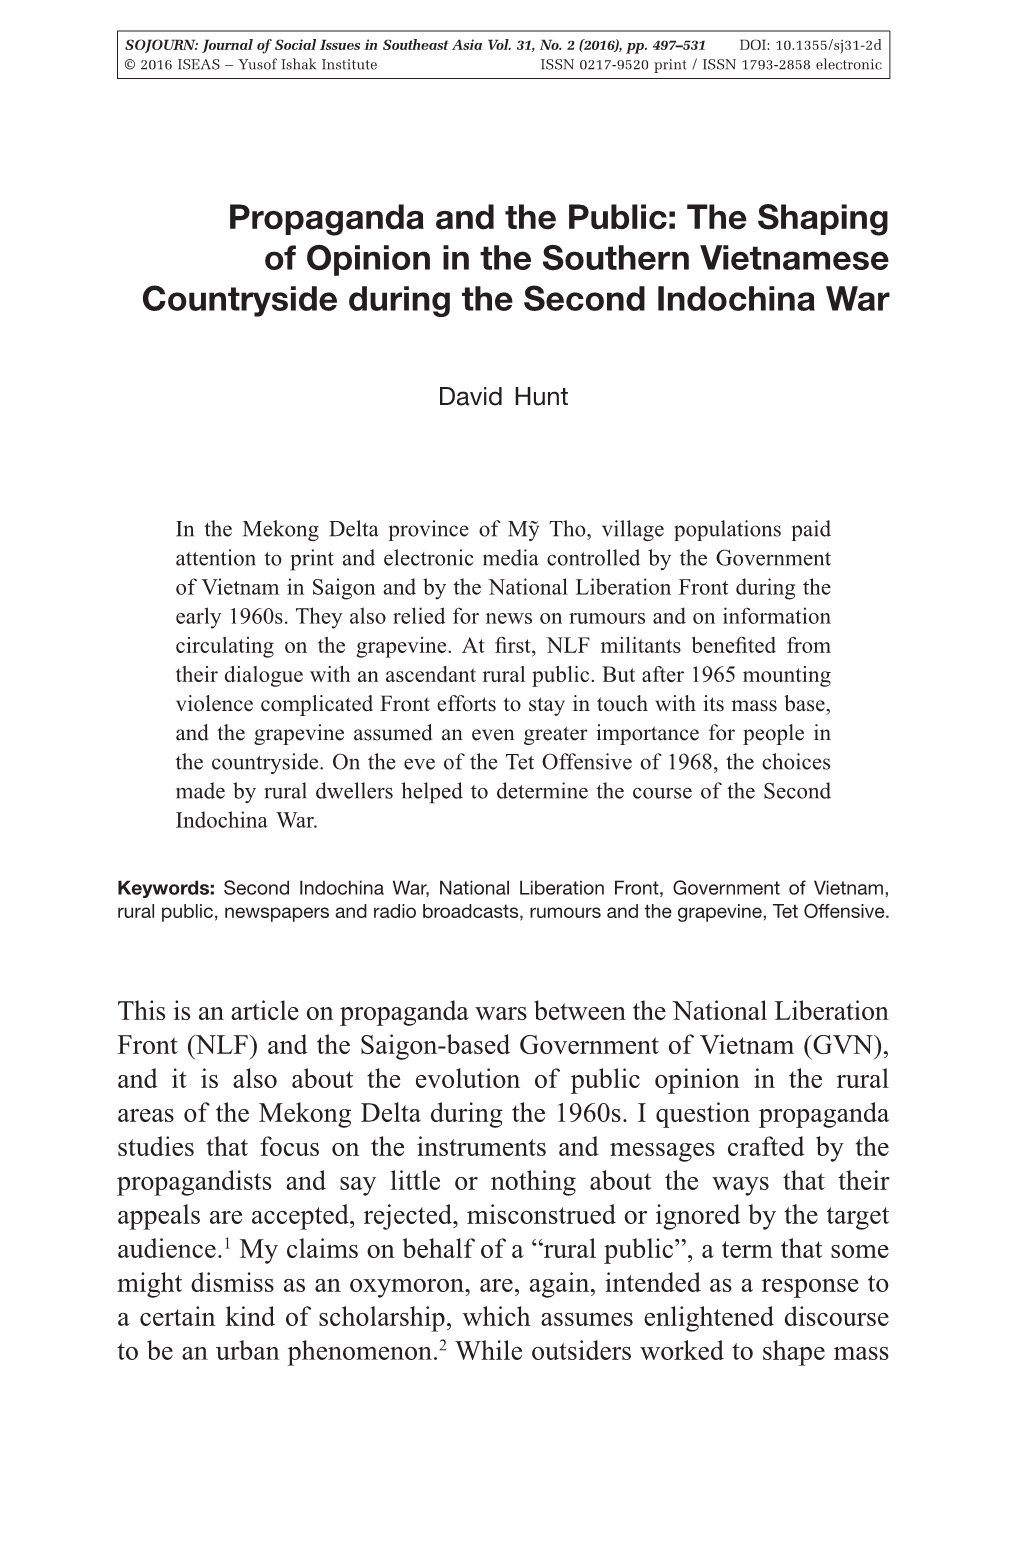 Propaganda and the Public: the Shaping of Opinion in the Southern Vietnamese Countryside During the Second Indochina War